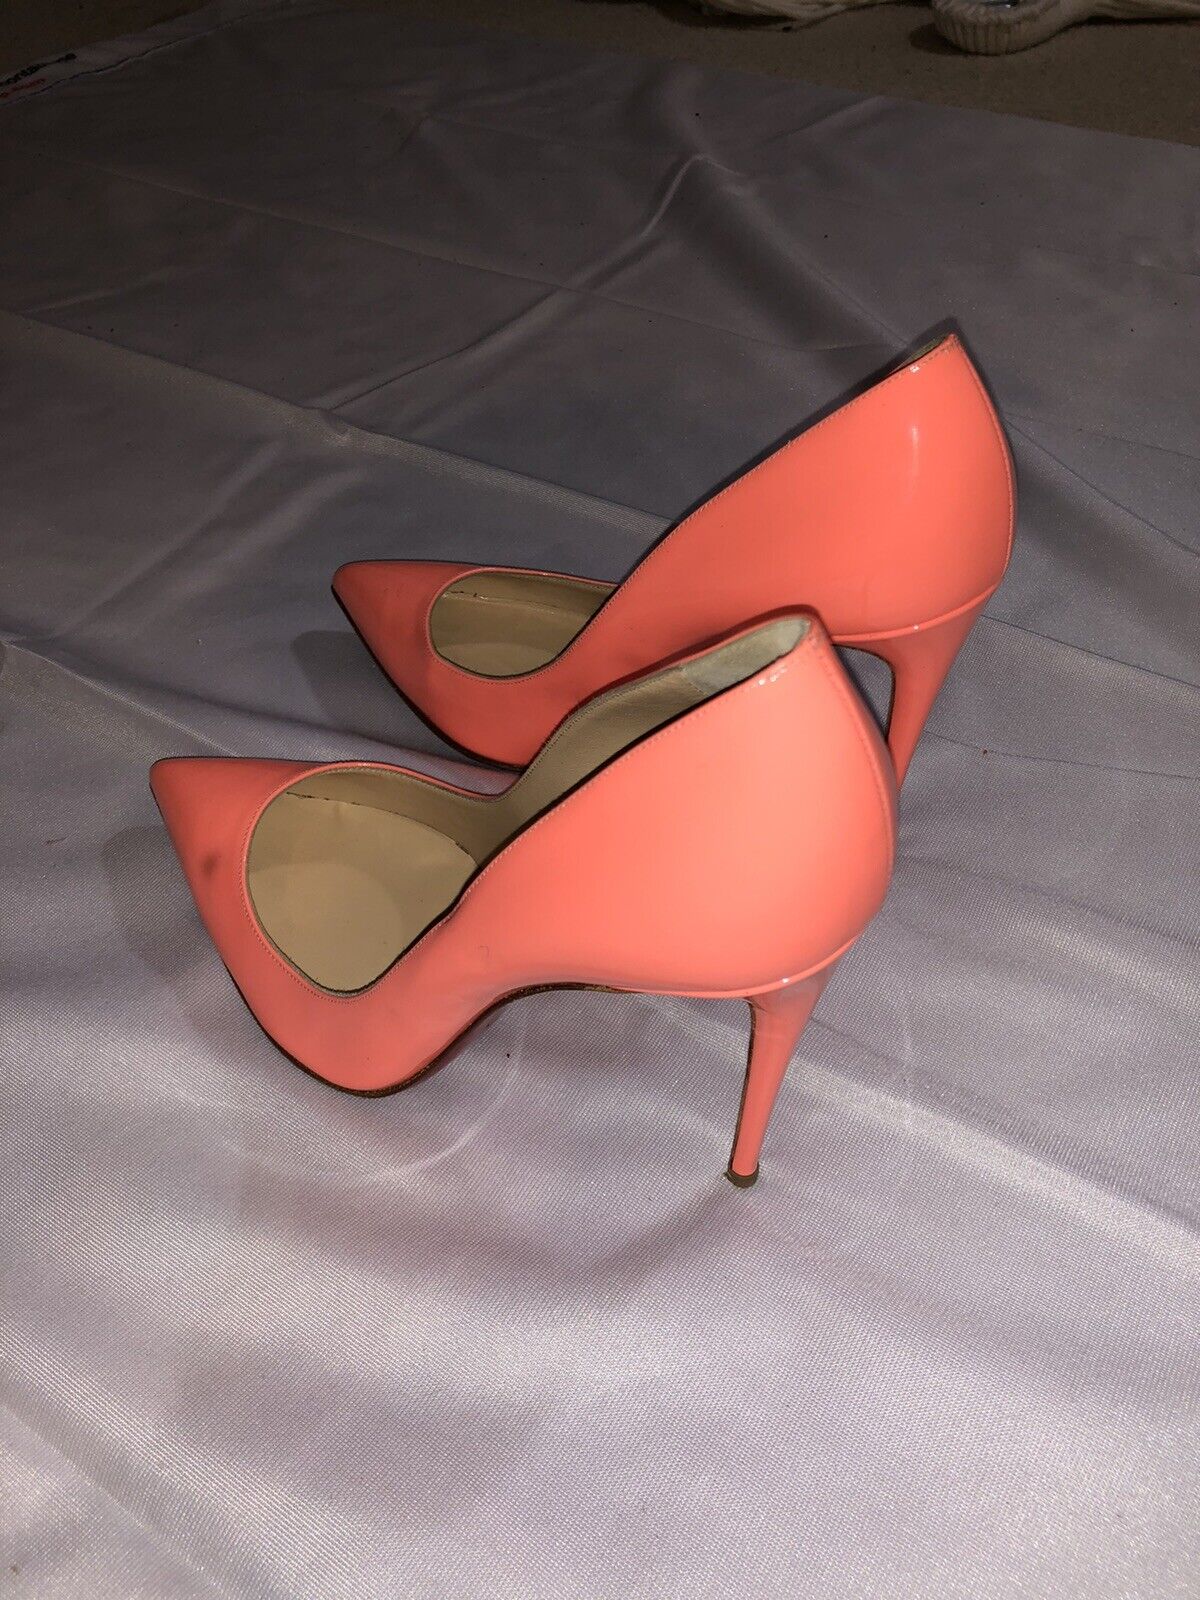 ladies women christian louboutin coral color heels size 40